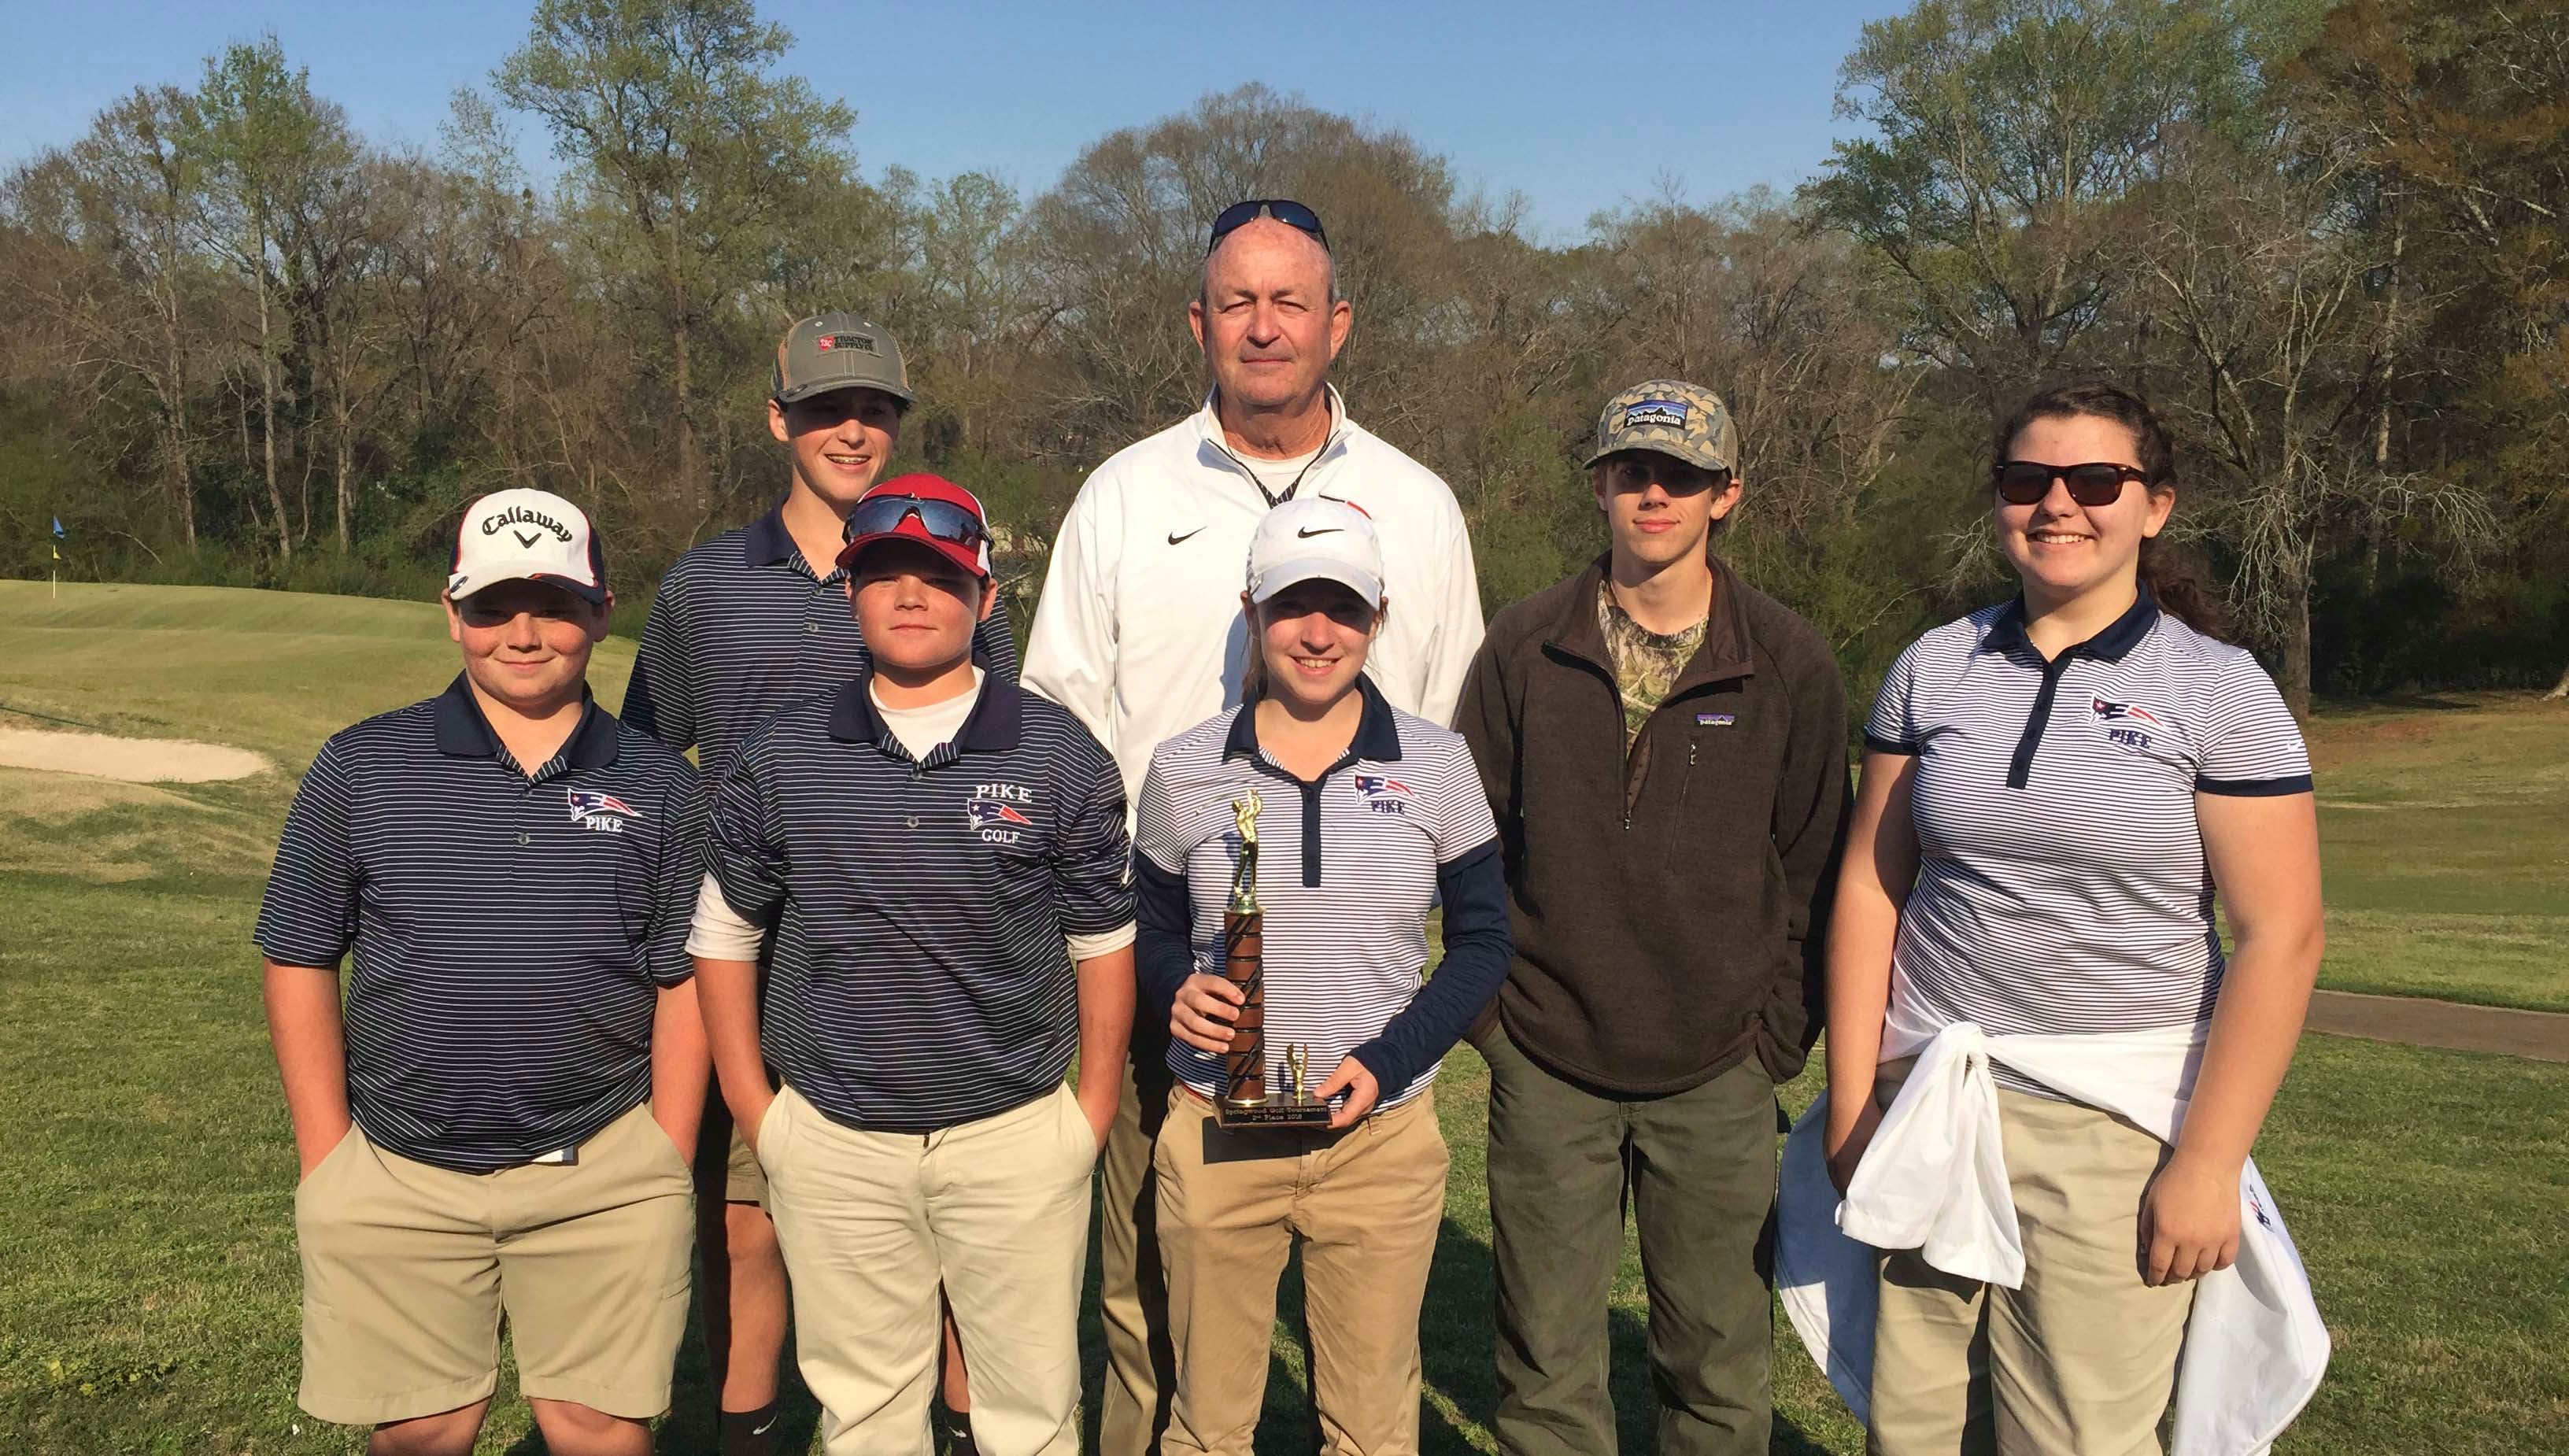 Messenger Photo/submitted photo The Pike Patriots golf team finished in second place in a match held at Point University Golf Center. Their 351 collective score qualifies the team for the state championship on April 25. Pictured above: Jace Calhoun, Christopher Farrar, Brax Barron, Coach Gene Allen, Susie Stell, Seth Arringon and Kacie Bell. Stell, Barron Calhoun and Farrar all qualified individually for the state.